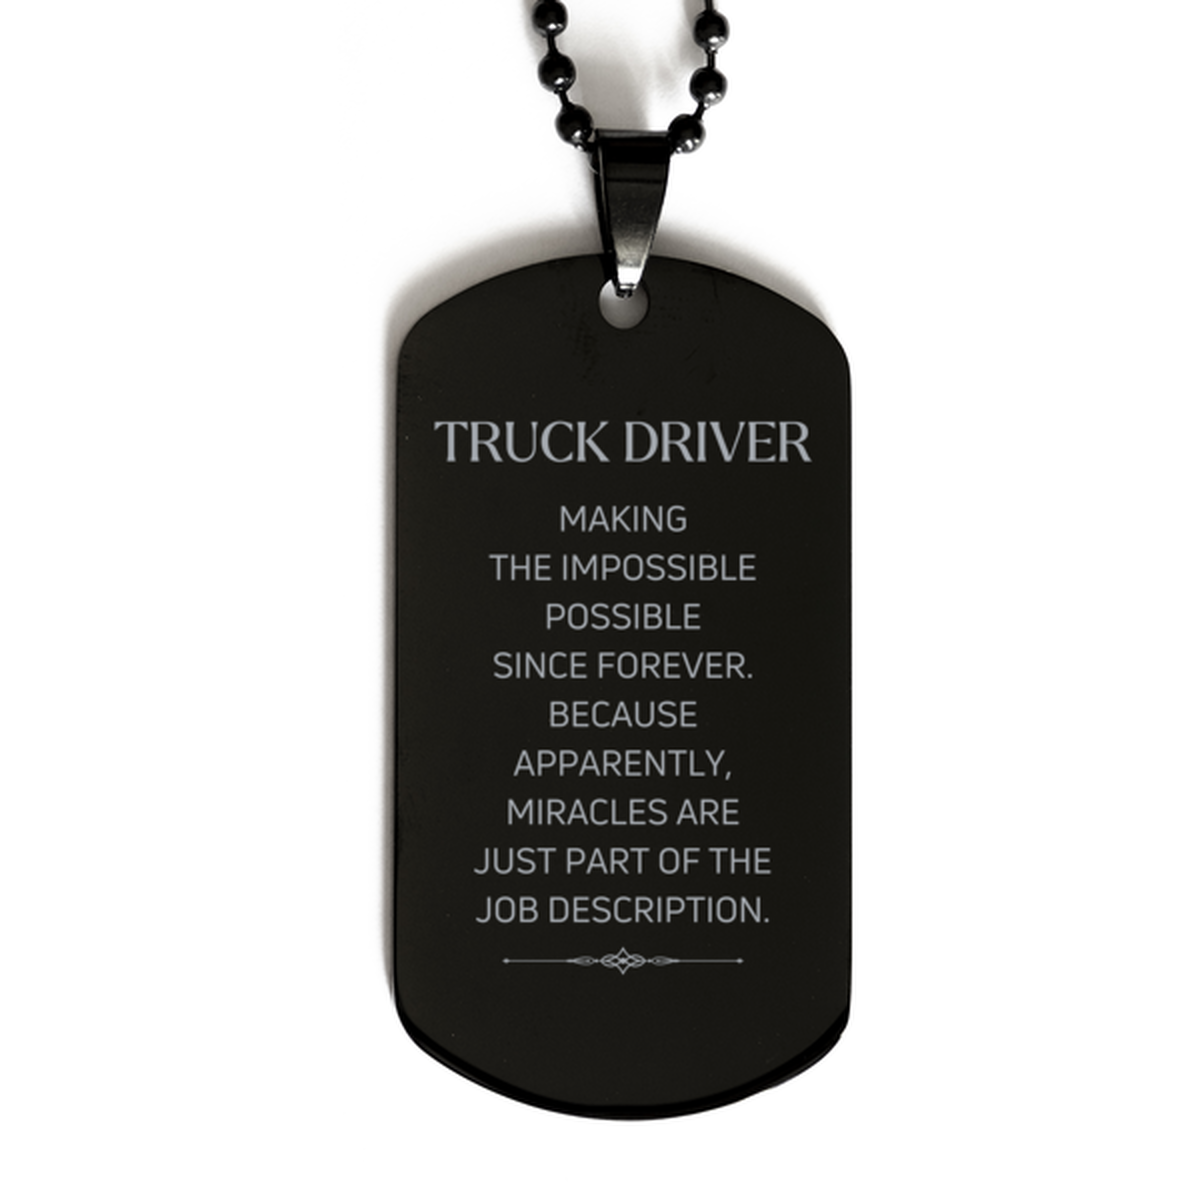 Funny Truck Driver Gifts, Miracles are just part of the job description, Inspirational Birthday Black Dog Tag For Truck Driver, Men, Women, Coworkers, Friends, Boss